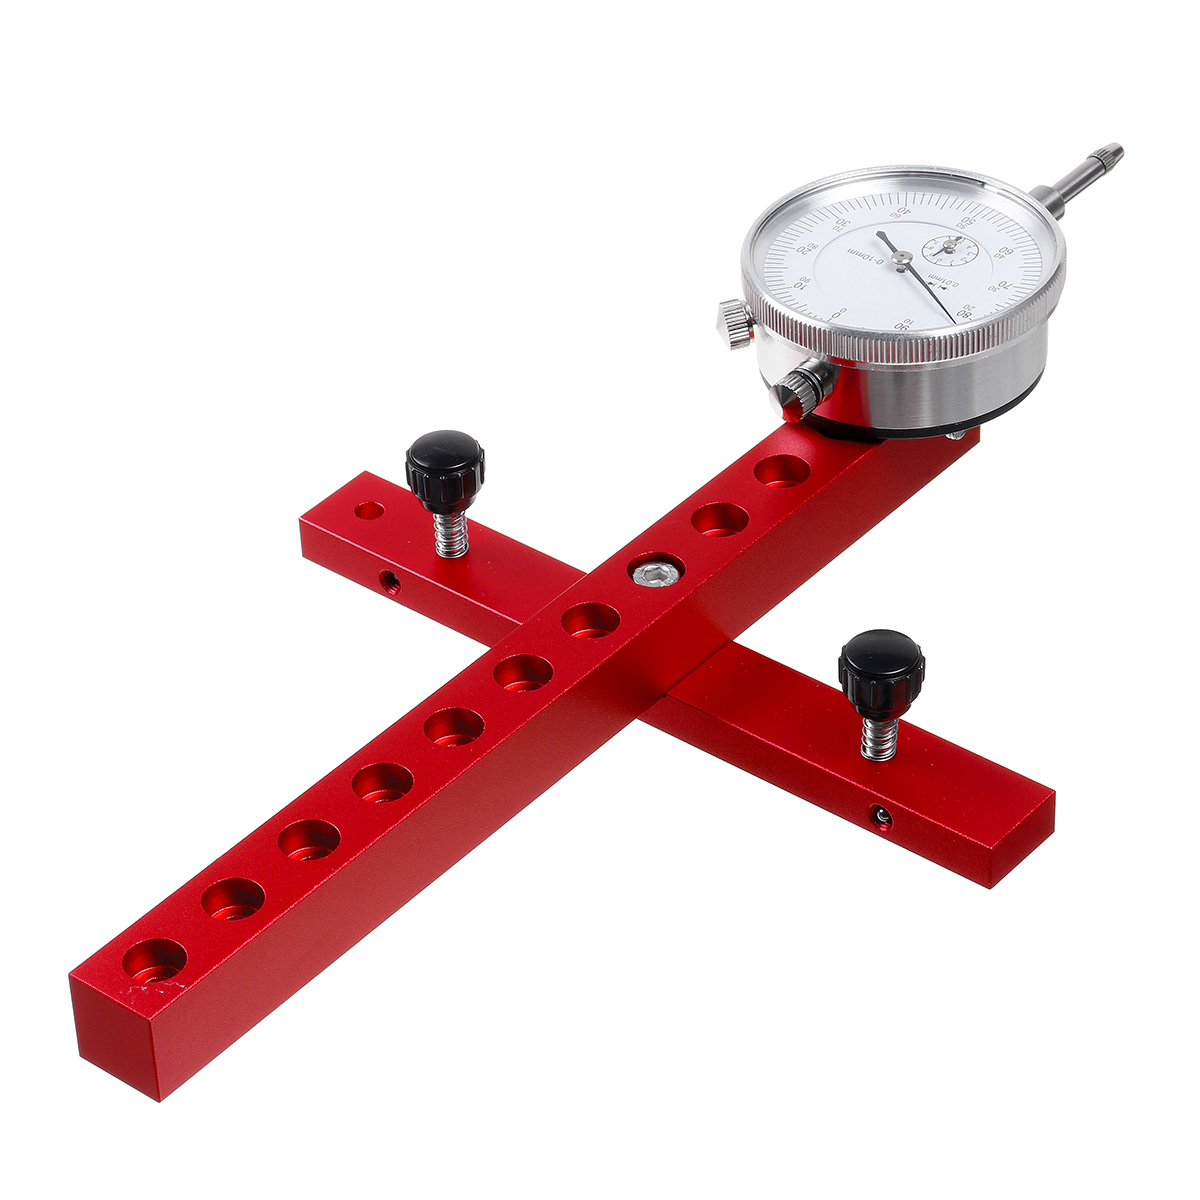 Aluminum-Alloy-Dial-indicator-Gauge-Table-Saws-Metric-or-Imperial-For-Aligning-and-Calibrating-Machi-1914181-1